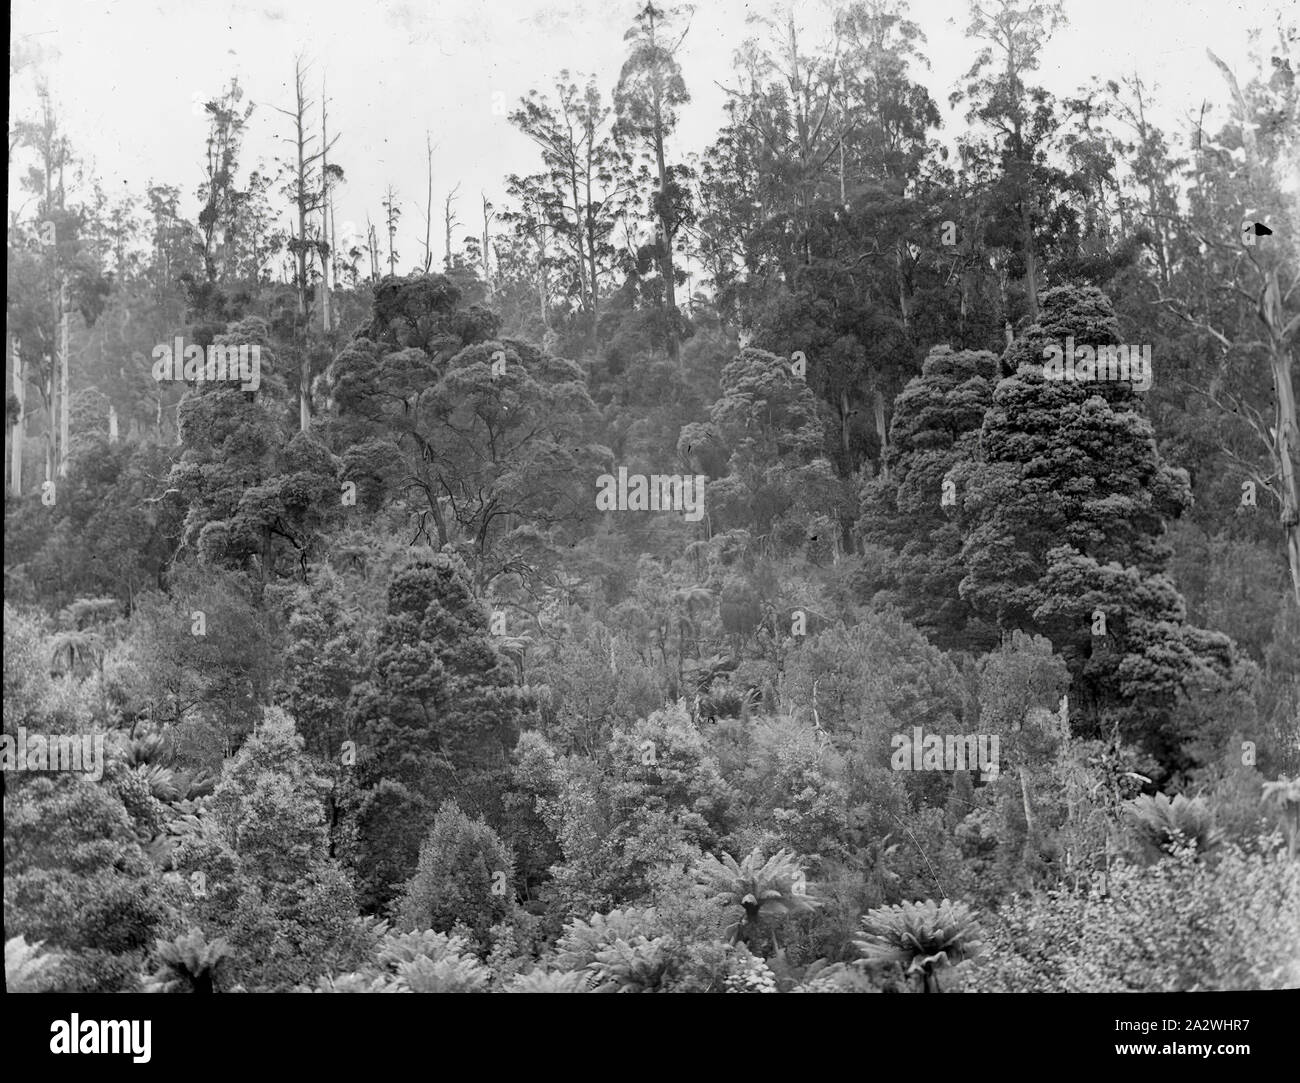 Lantern Slide - Forest, Australia, 1900, Black and white image of an Australian forest, photographed by A.G. Campbell, son of A.J. Campbell. A notation added to the slide: Clutching with myriad precious roots the soil Stock Photo